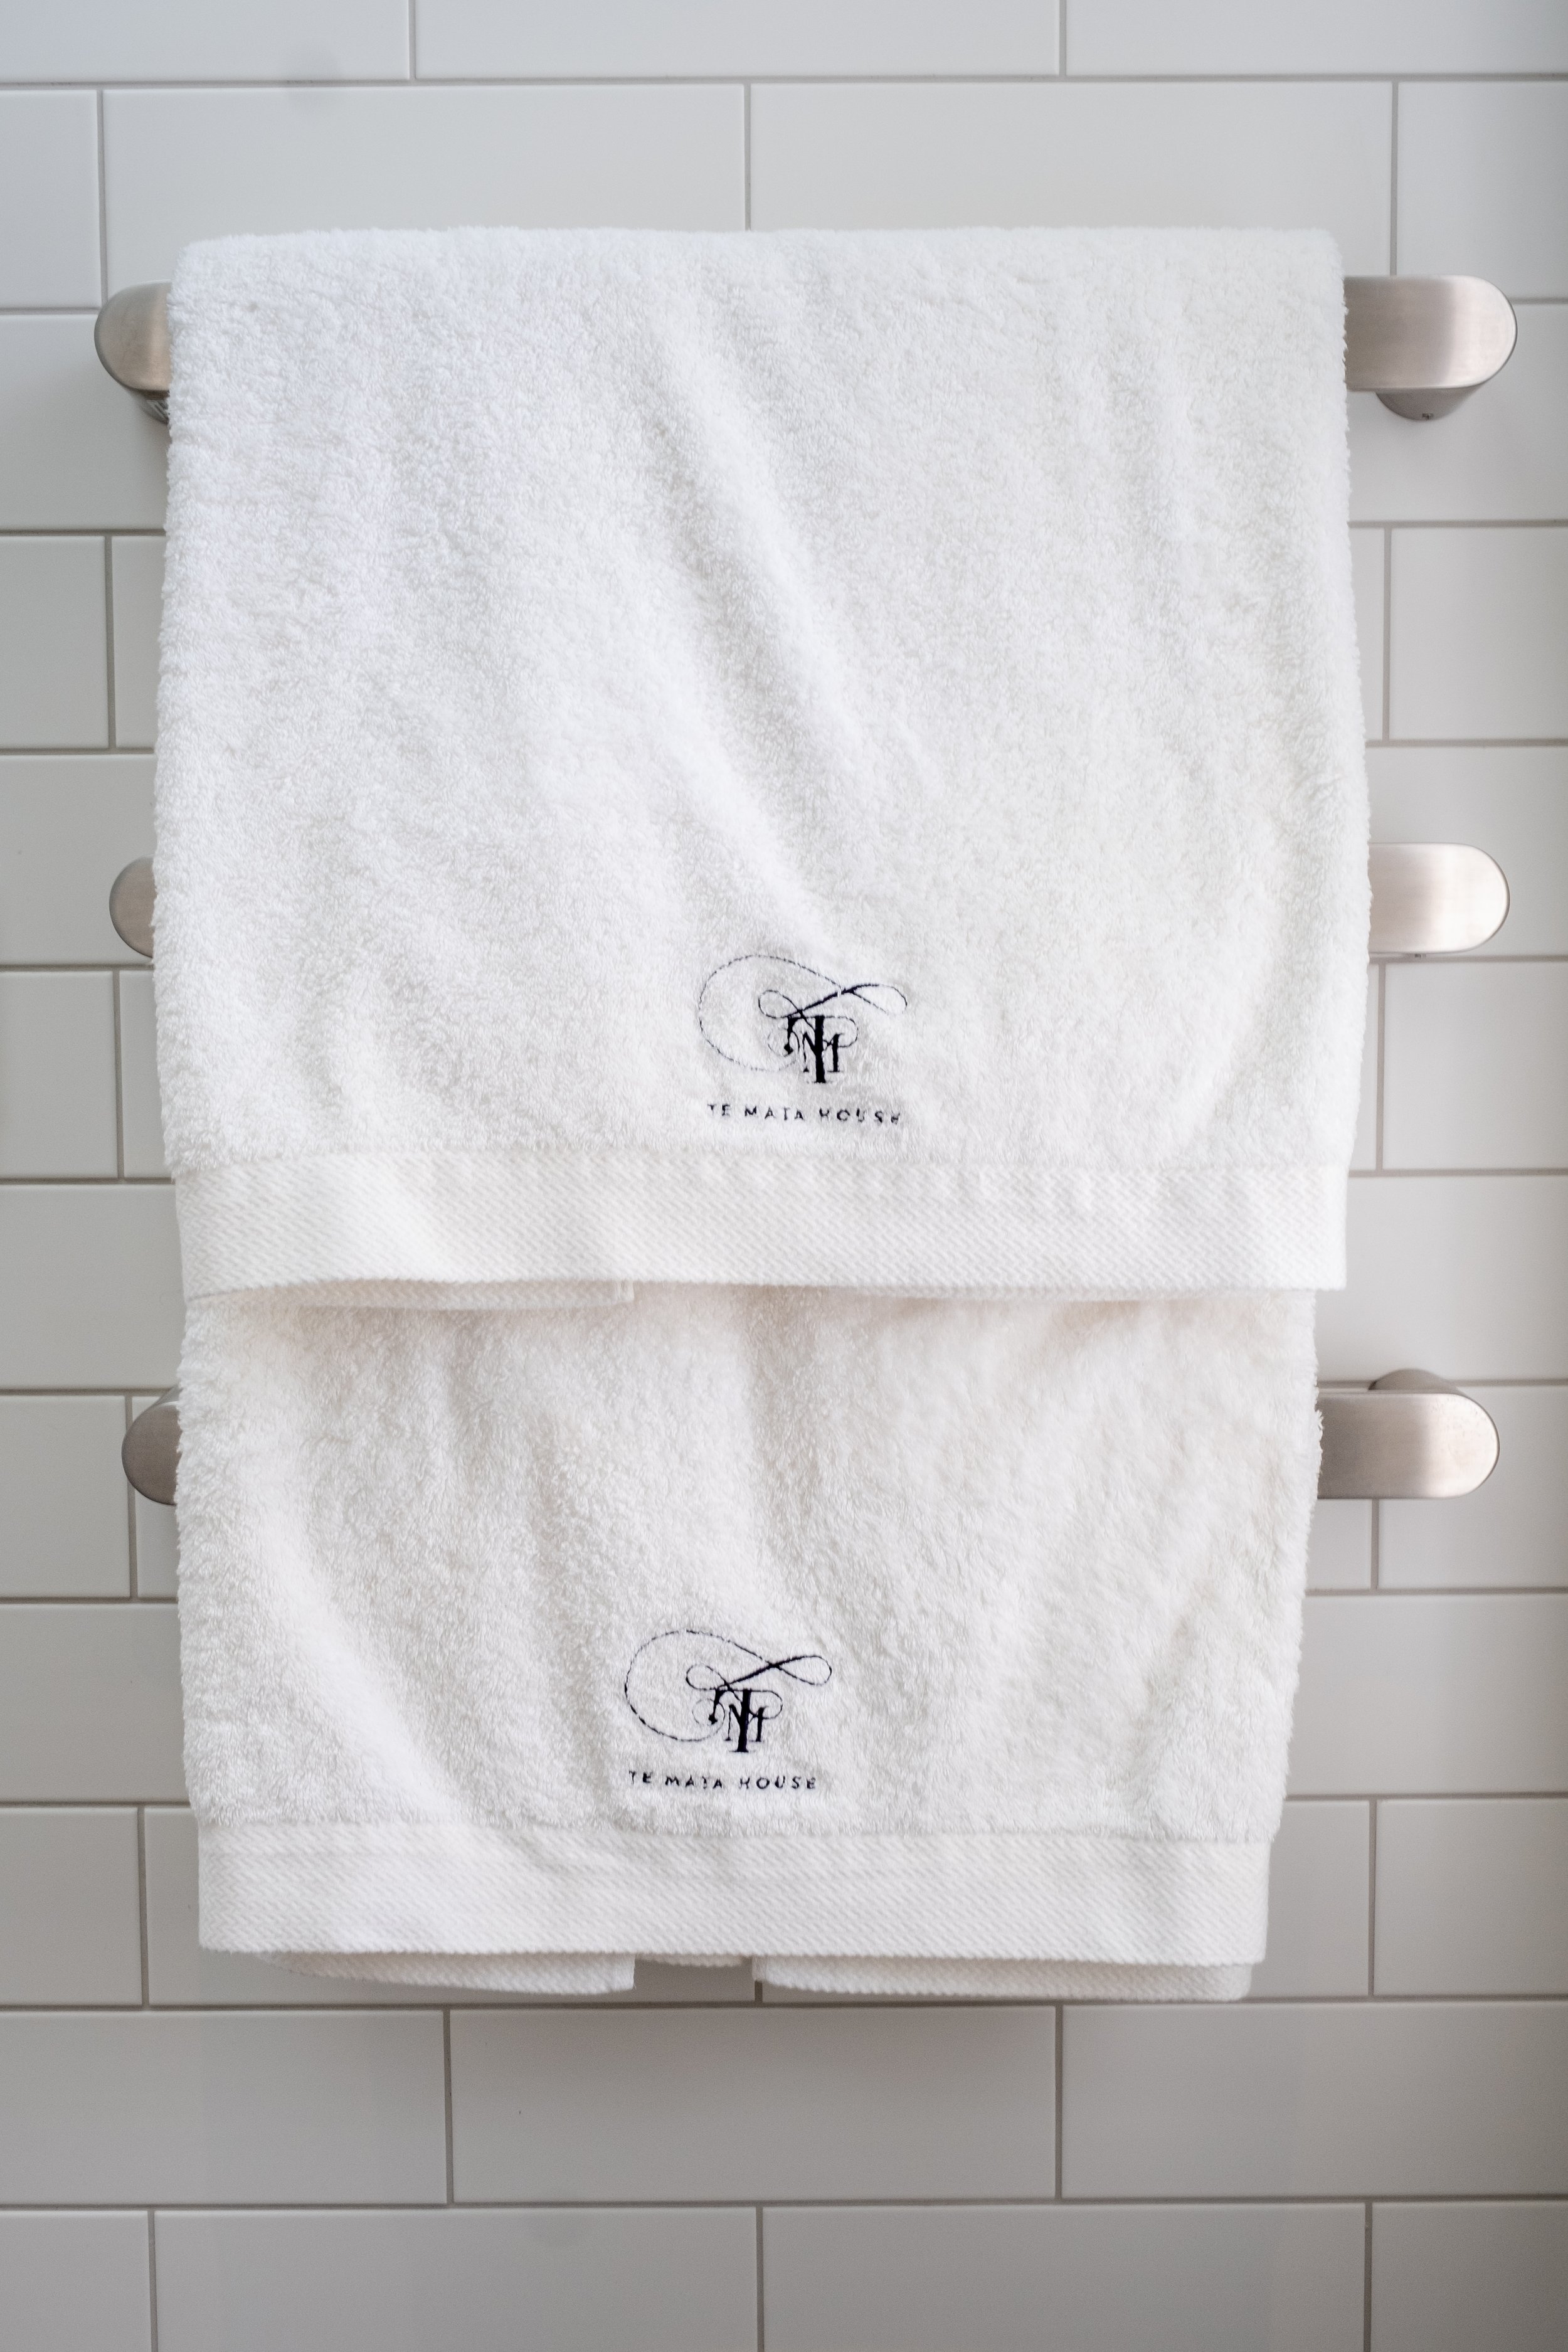 The Cottage - luxury linen and towels